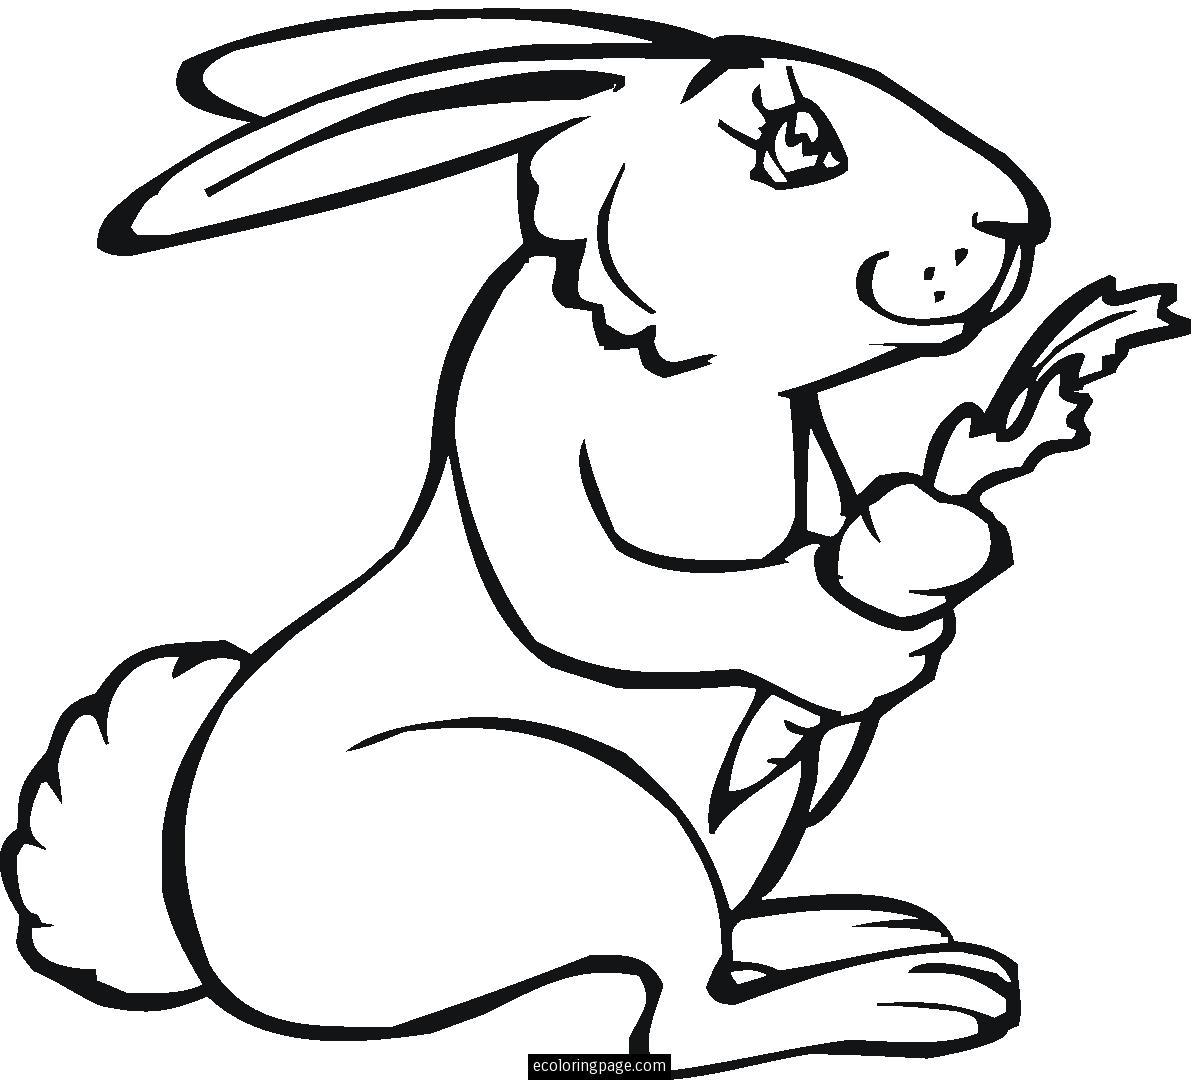 Bunny Rabbit Eating A Carrot Coloring Page For Kids Printable